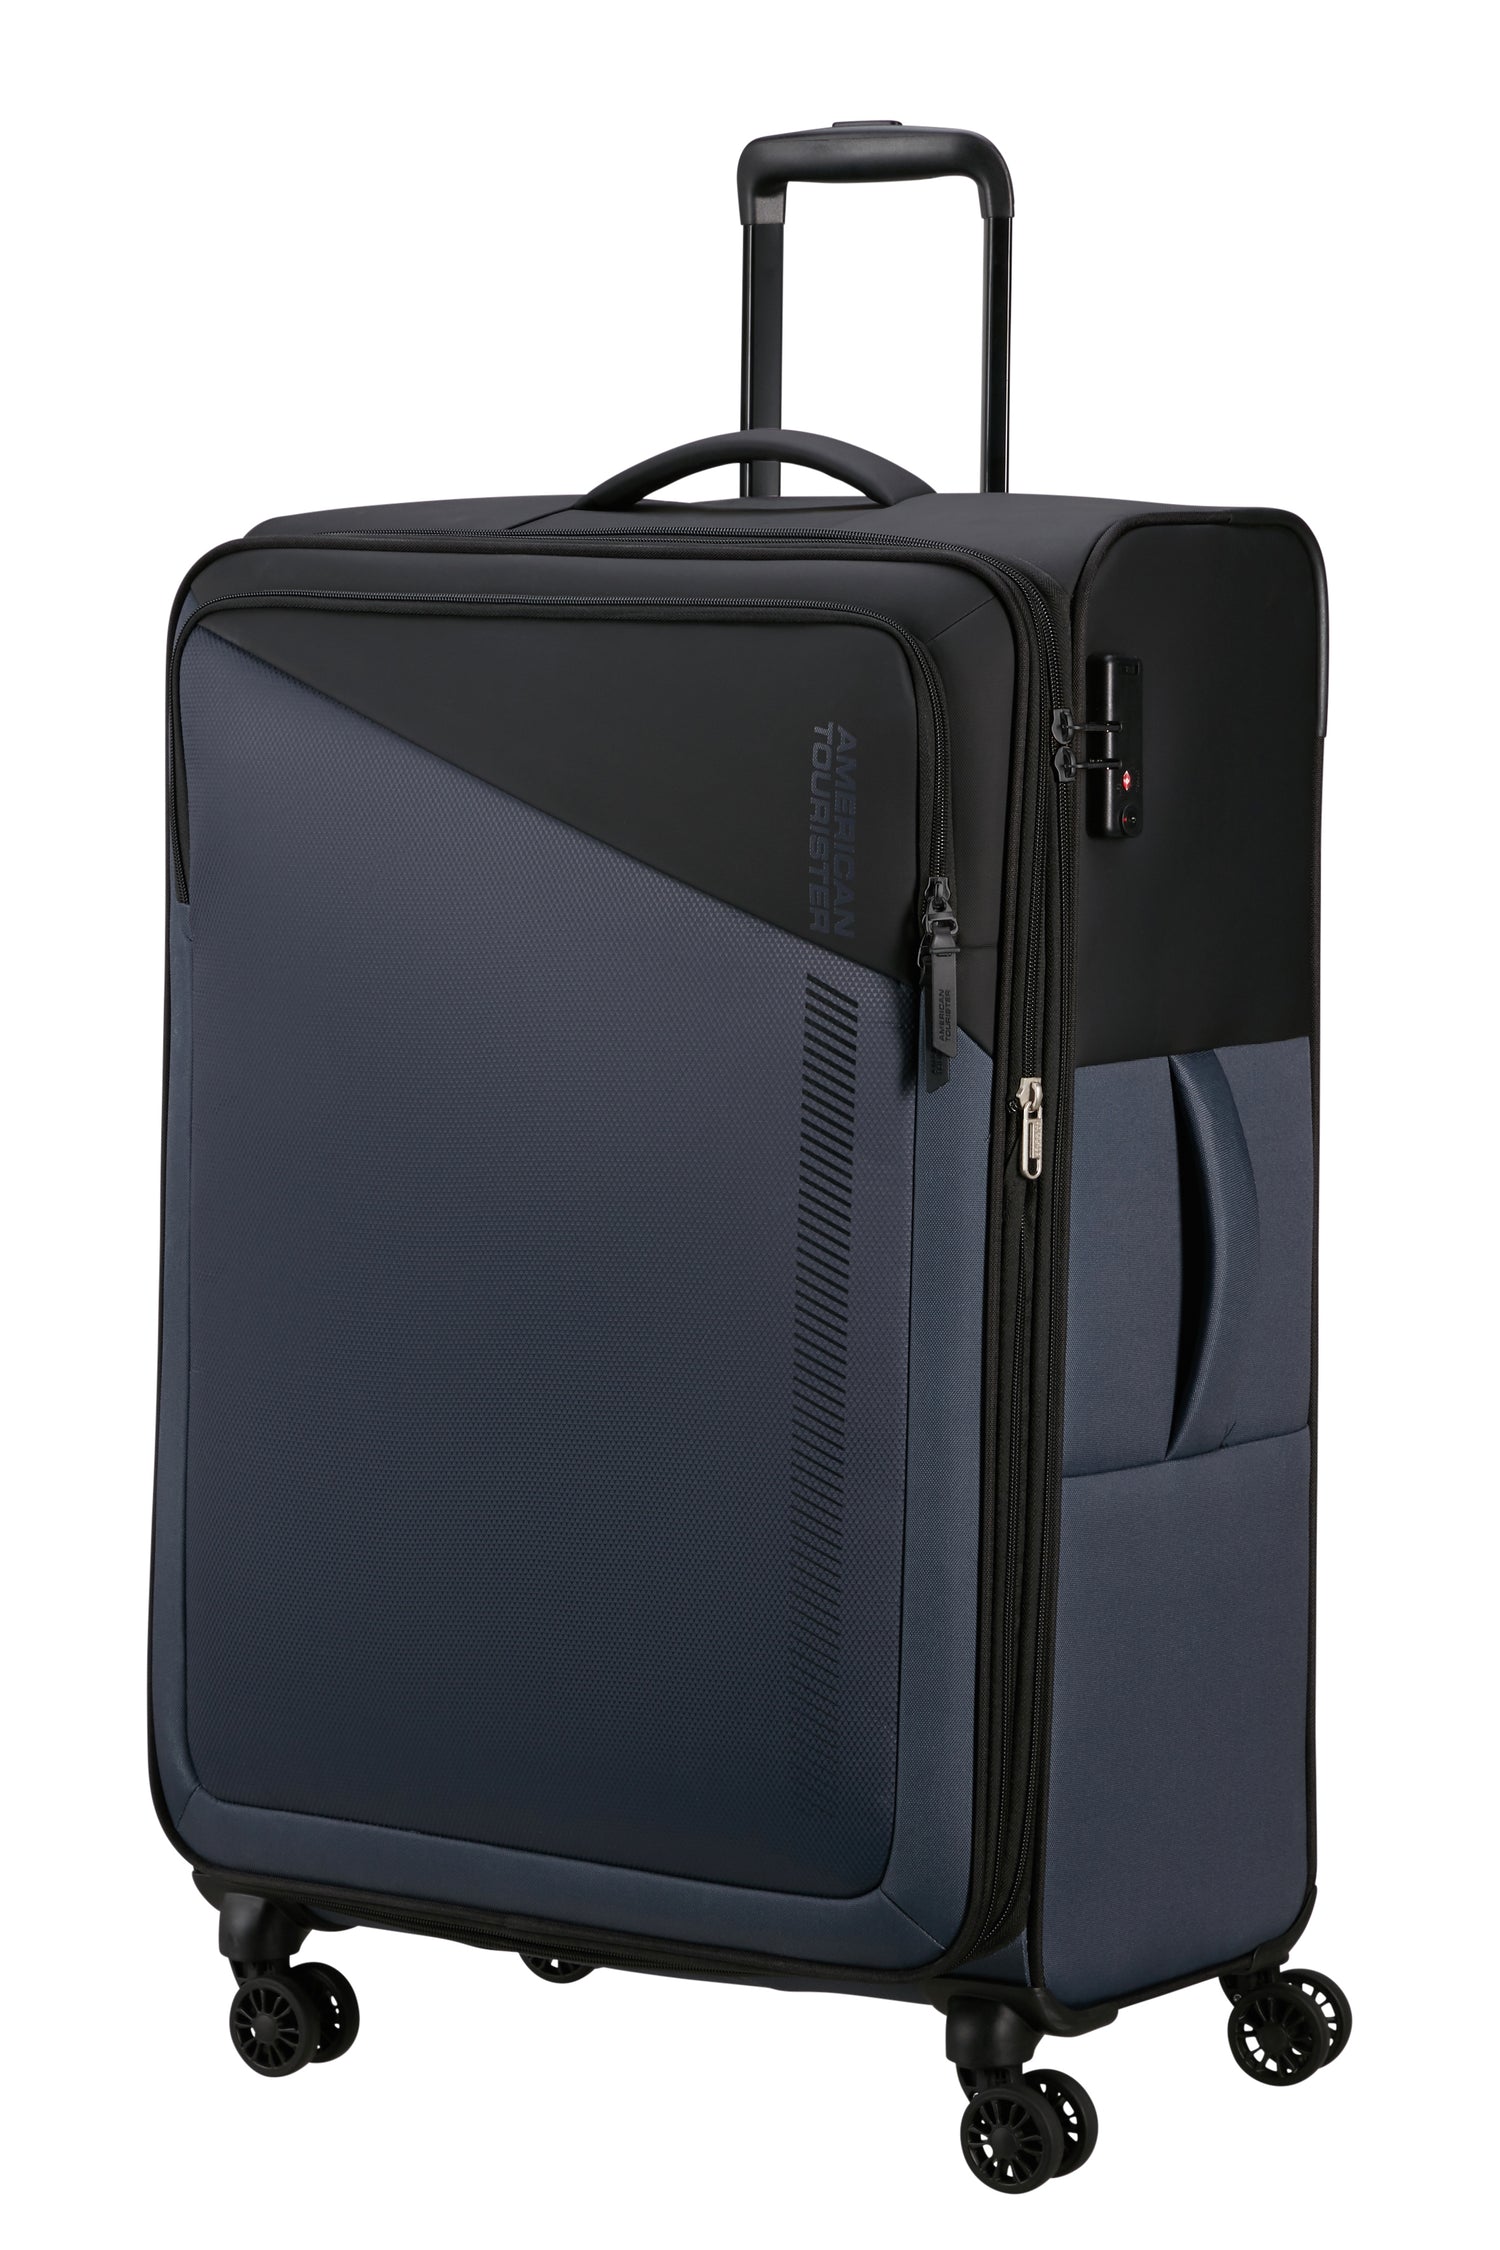 American Tourister Daring Dash Expandable 77cm Spinner